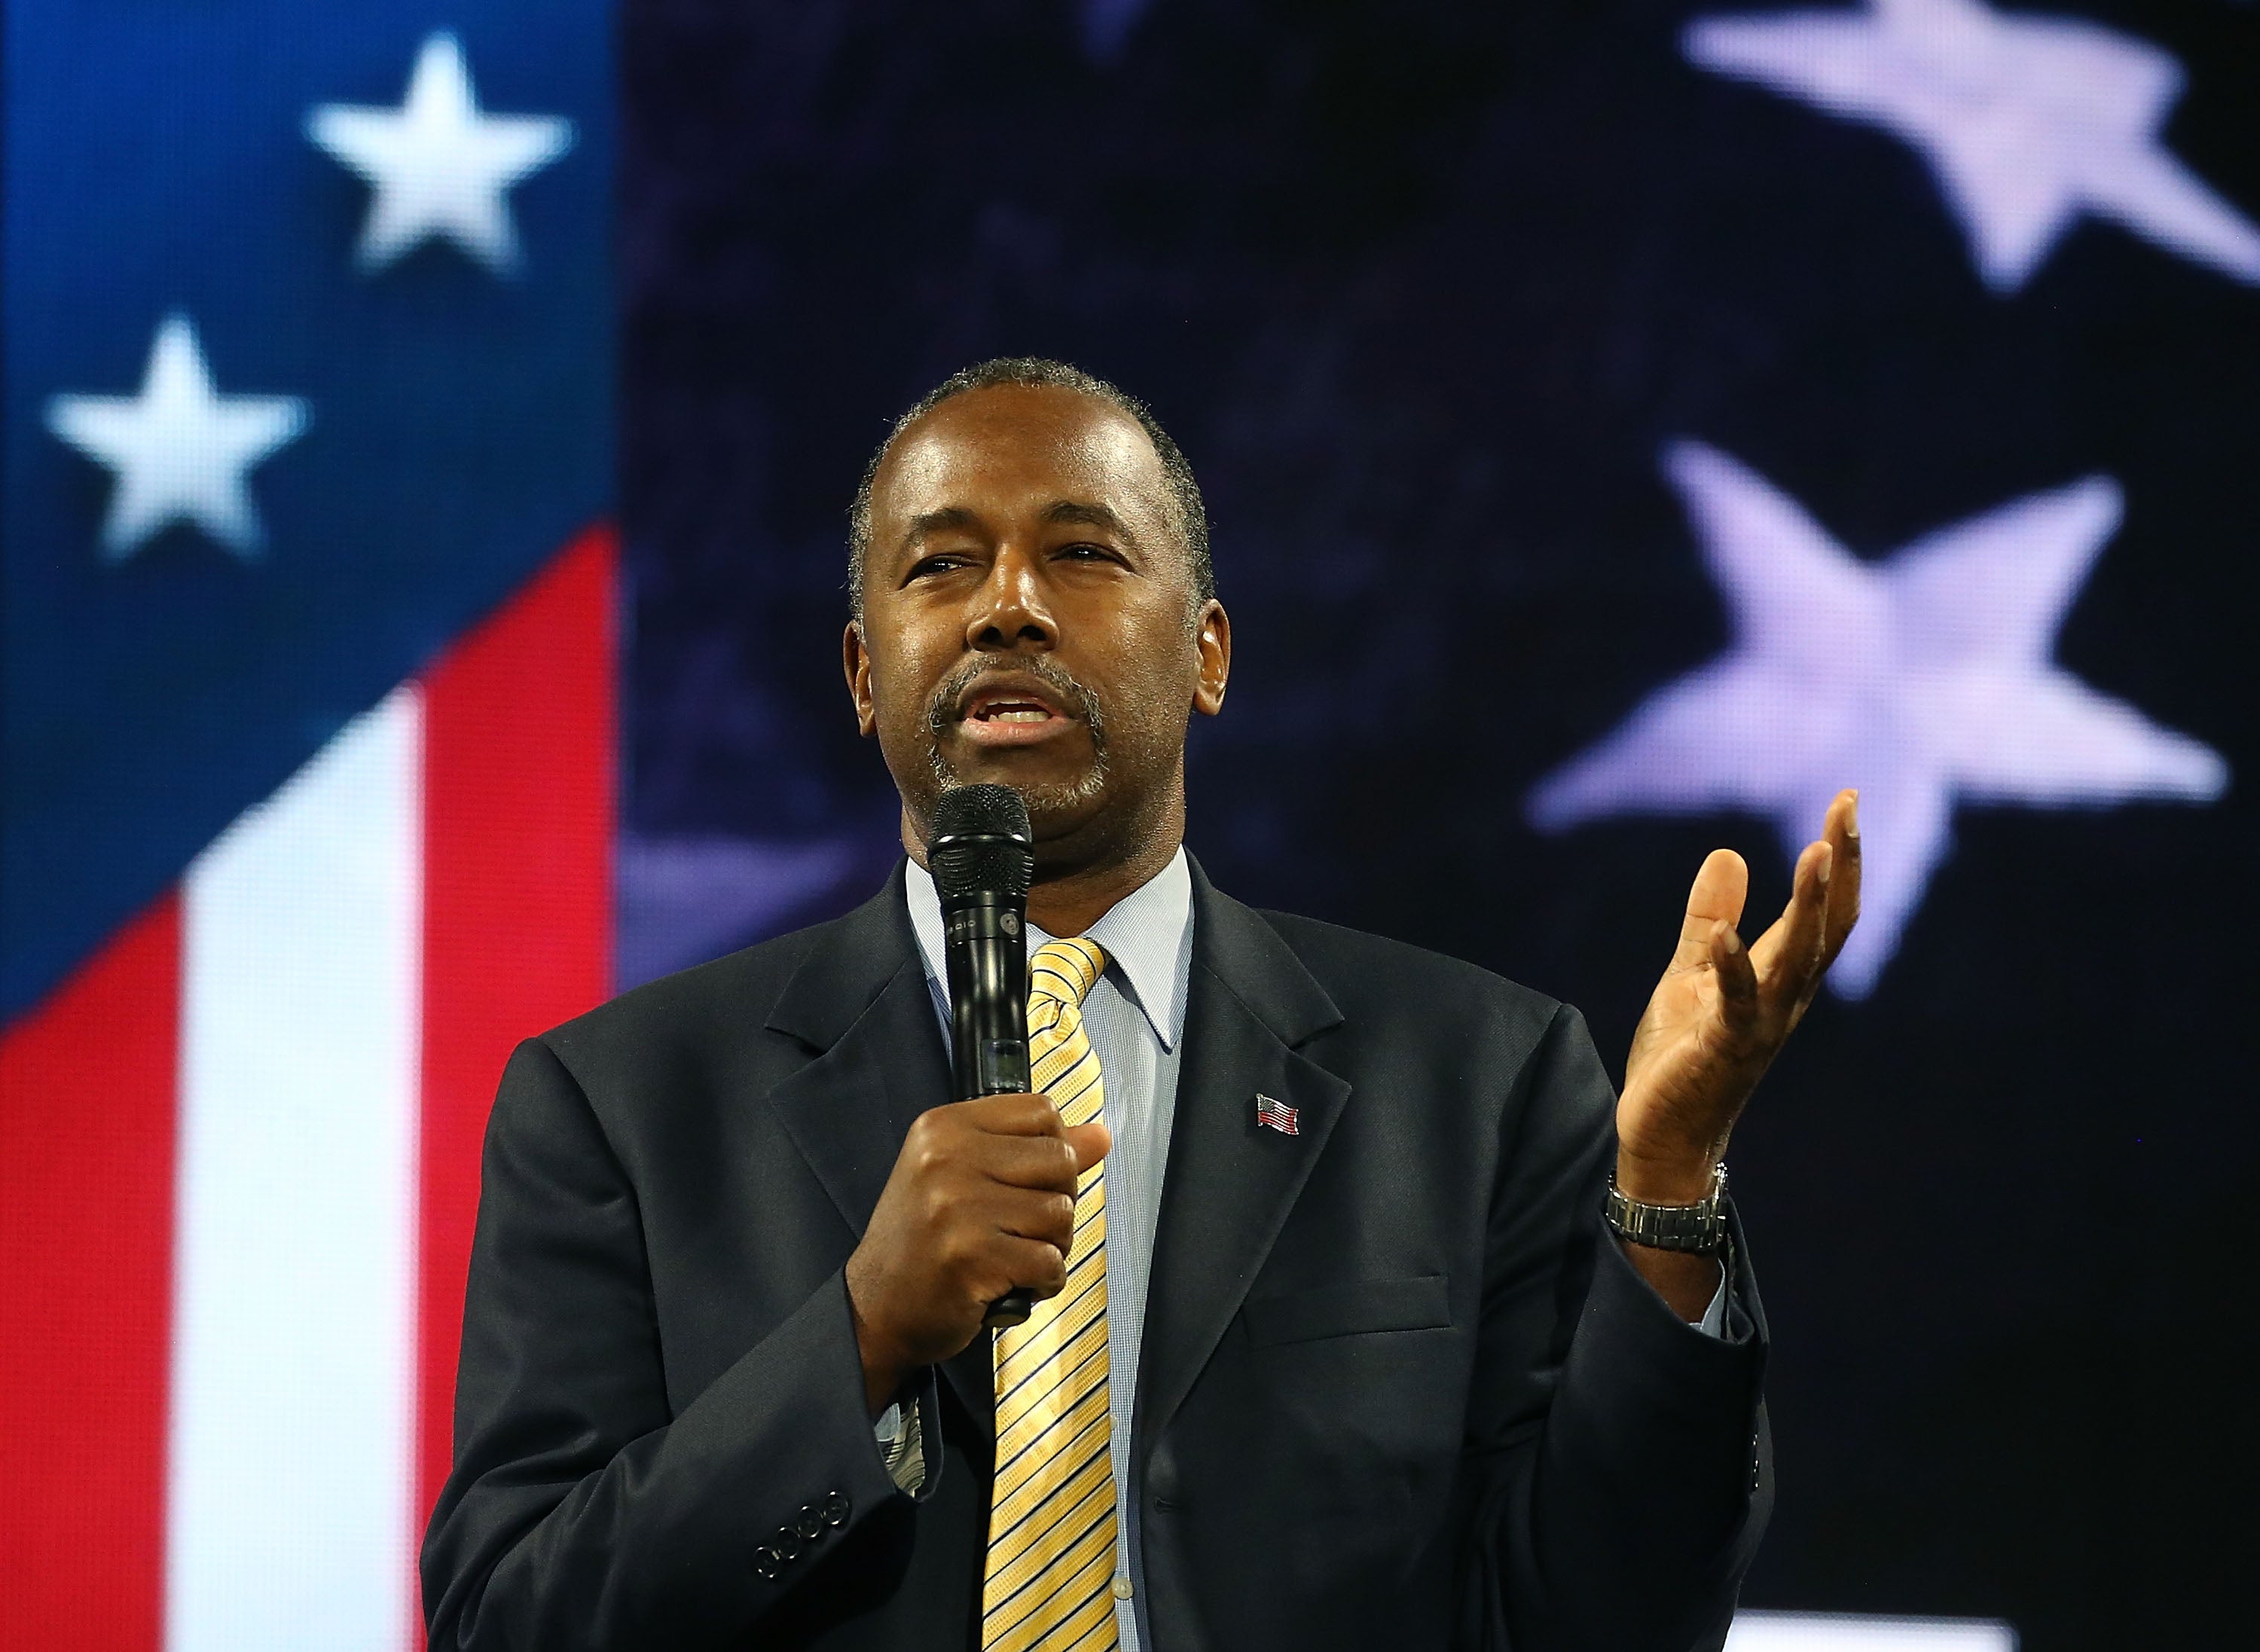 Ben Carson Tried To Deprive Low-Income Families Of Better Housing Opportunities..But It Didn't Work
